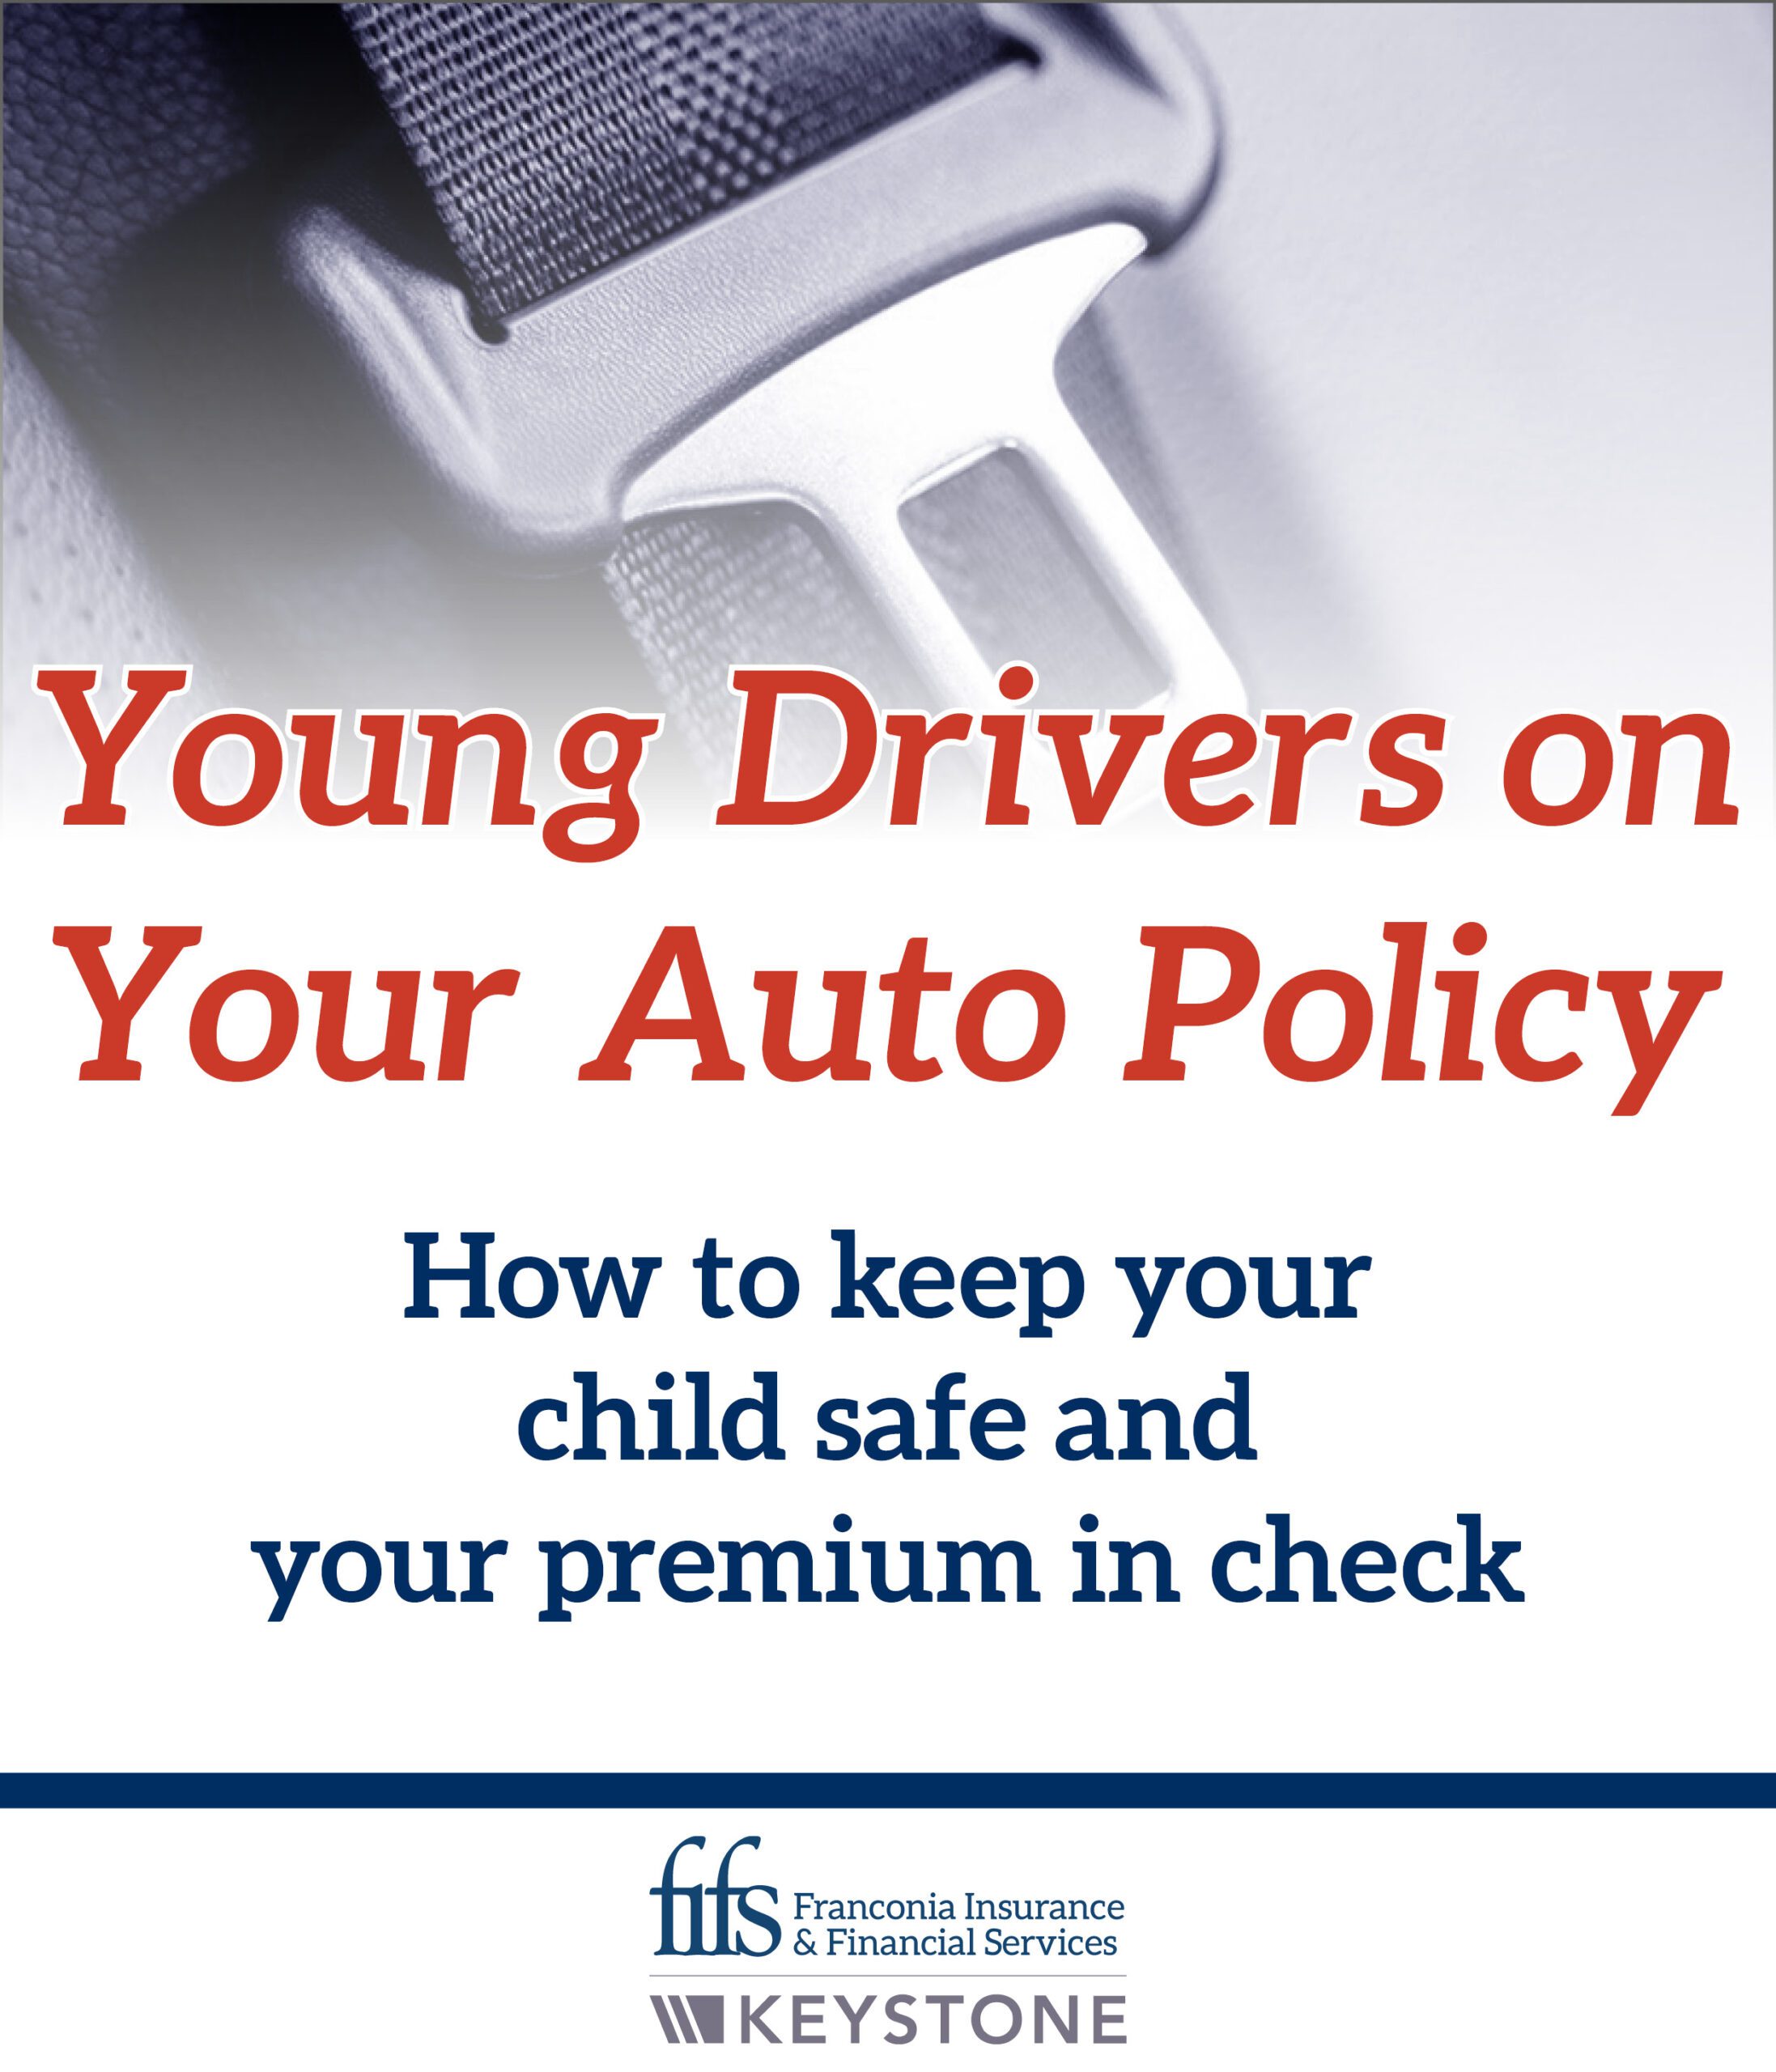 Young Drivers on Your Auto Policy